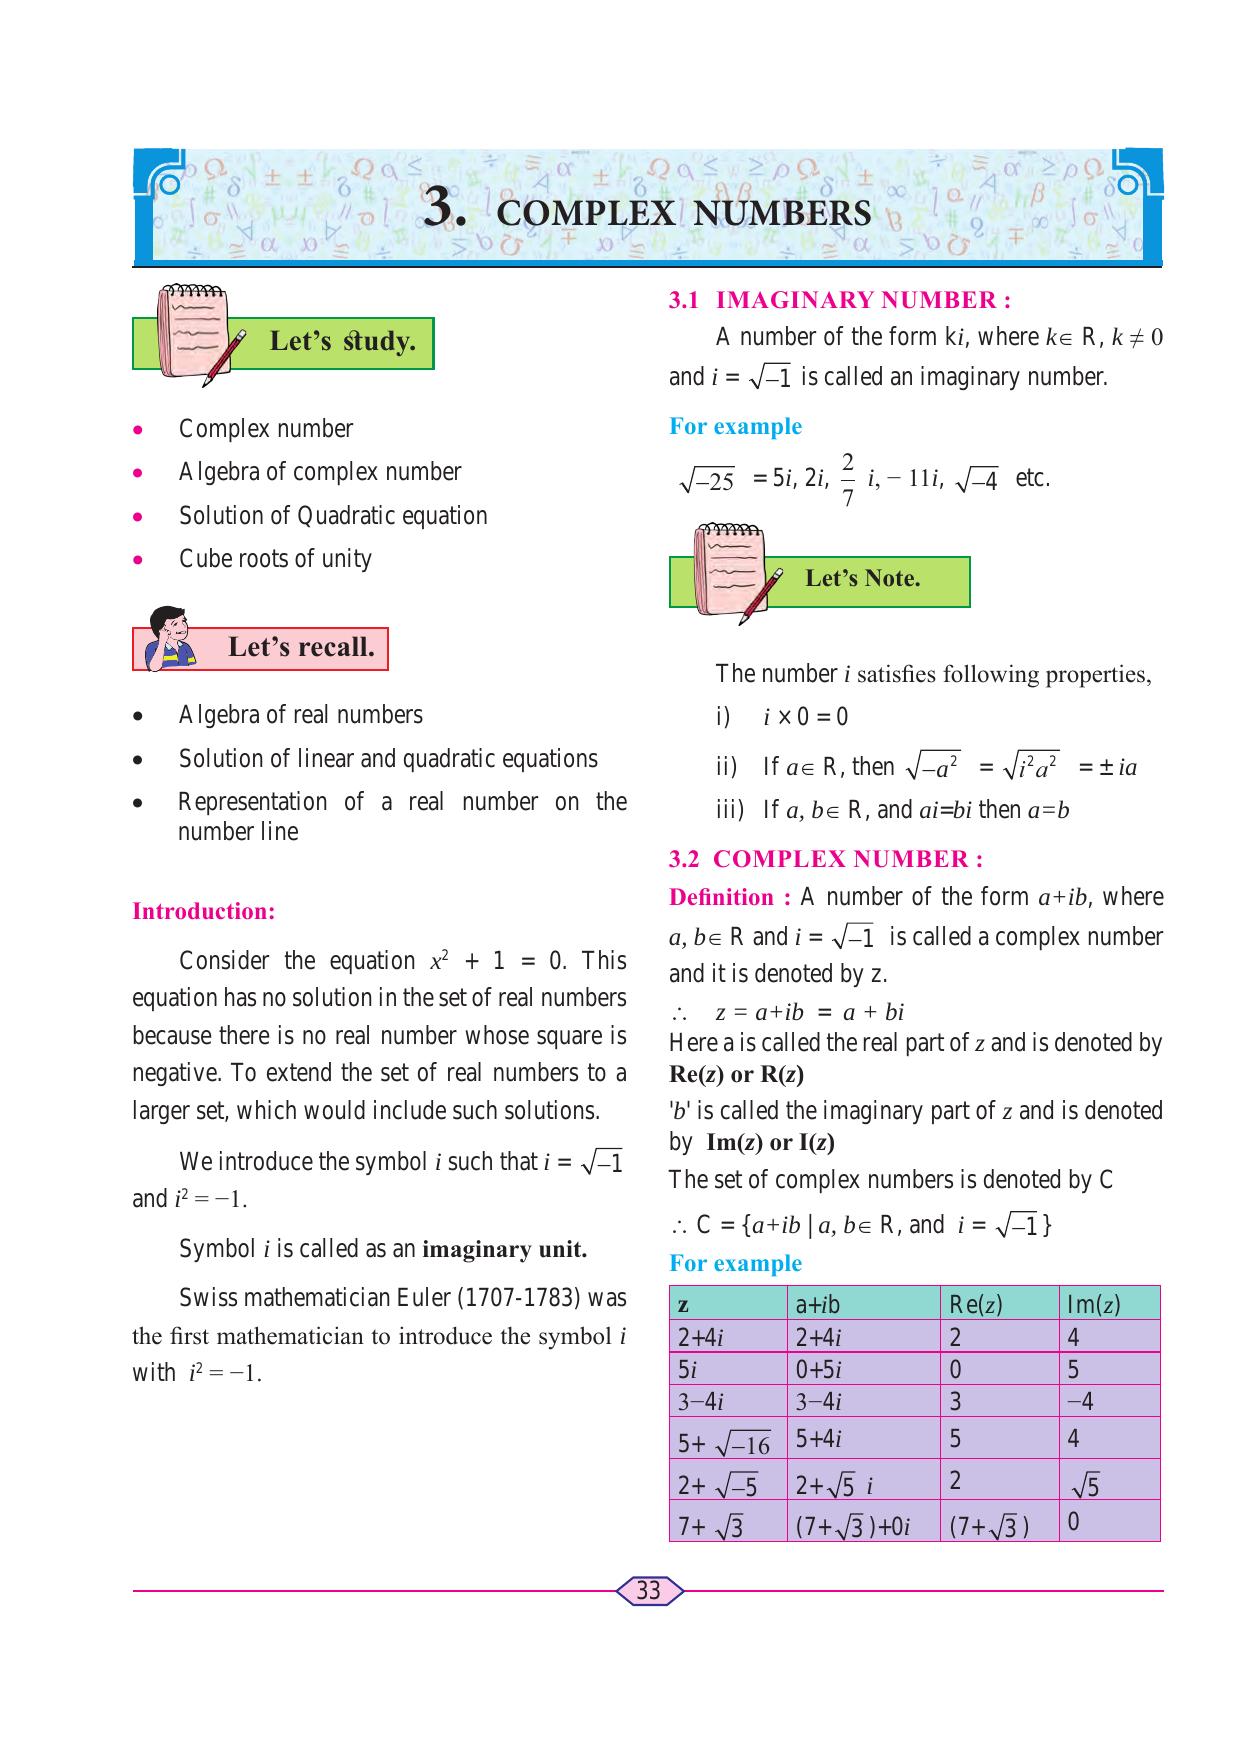 Maharashtra Board Class 11 Maths (Commerce) (Part 1) Textbook - Page 43